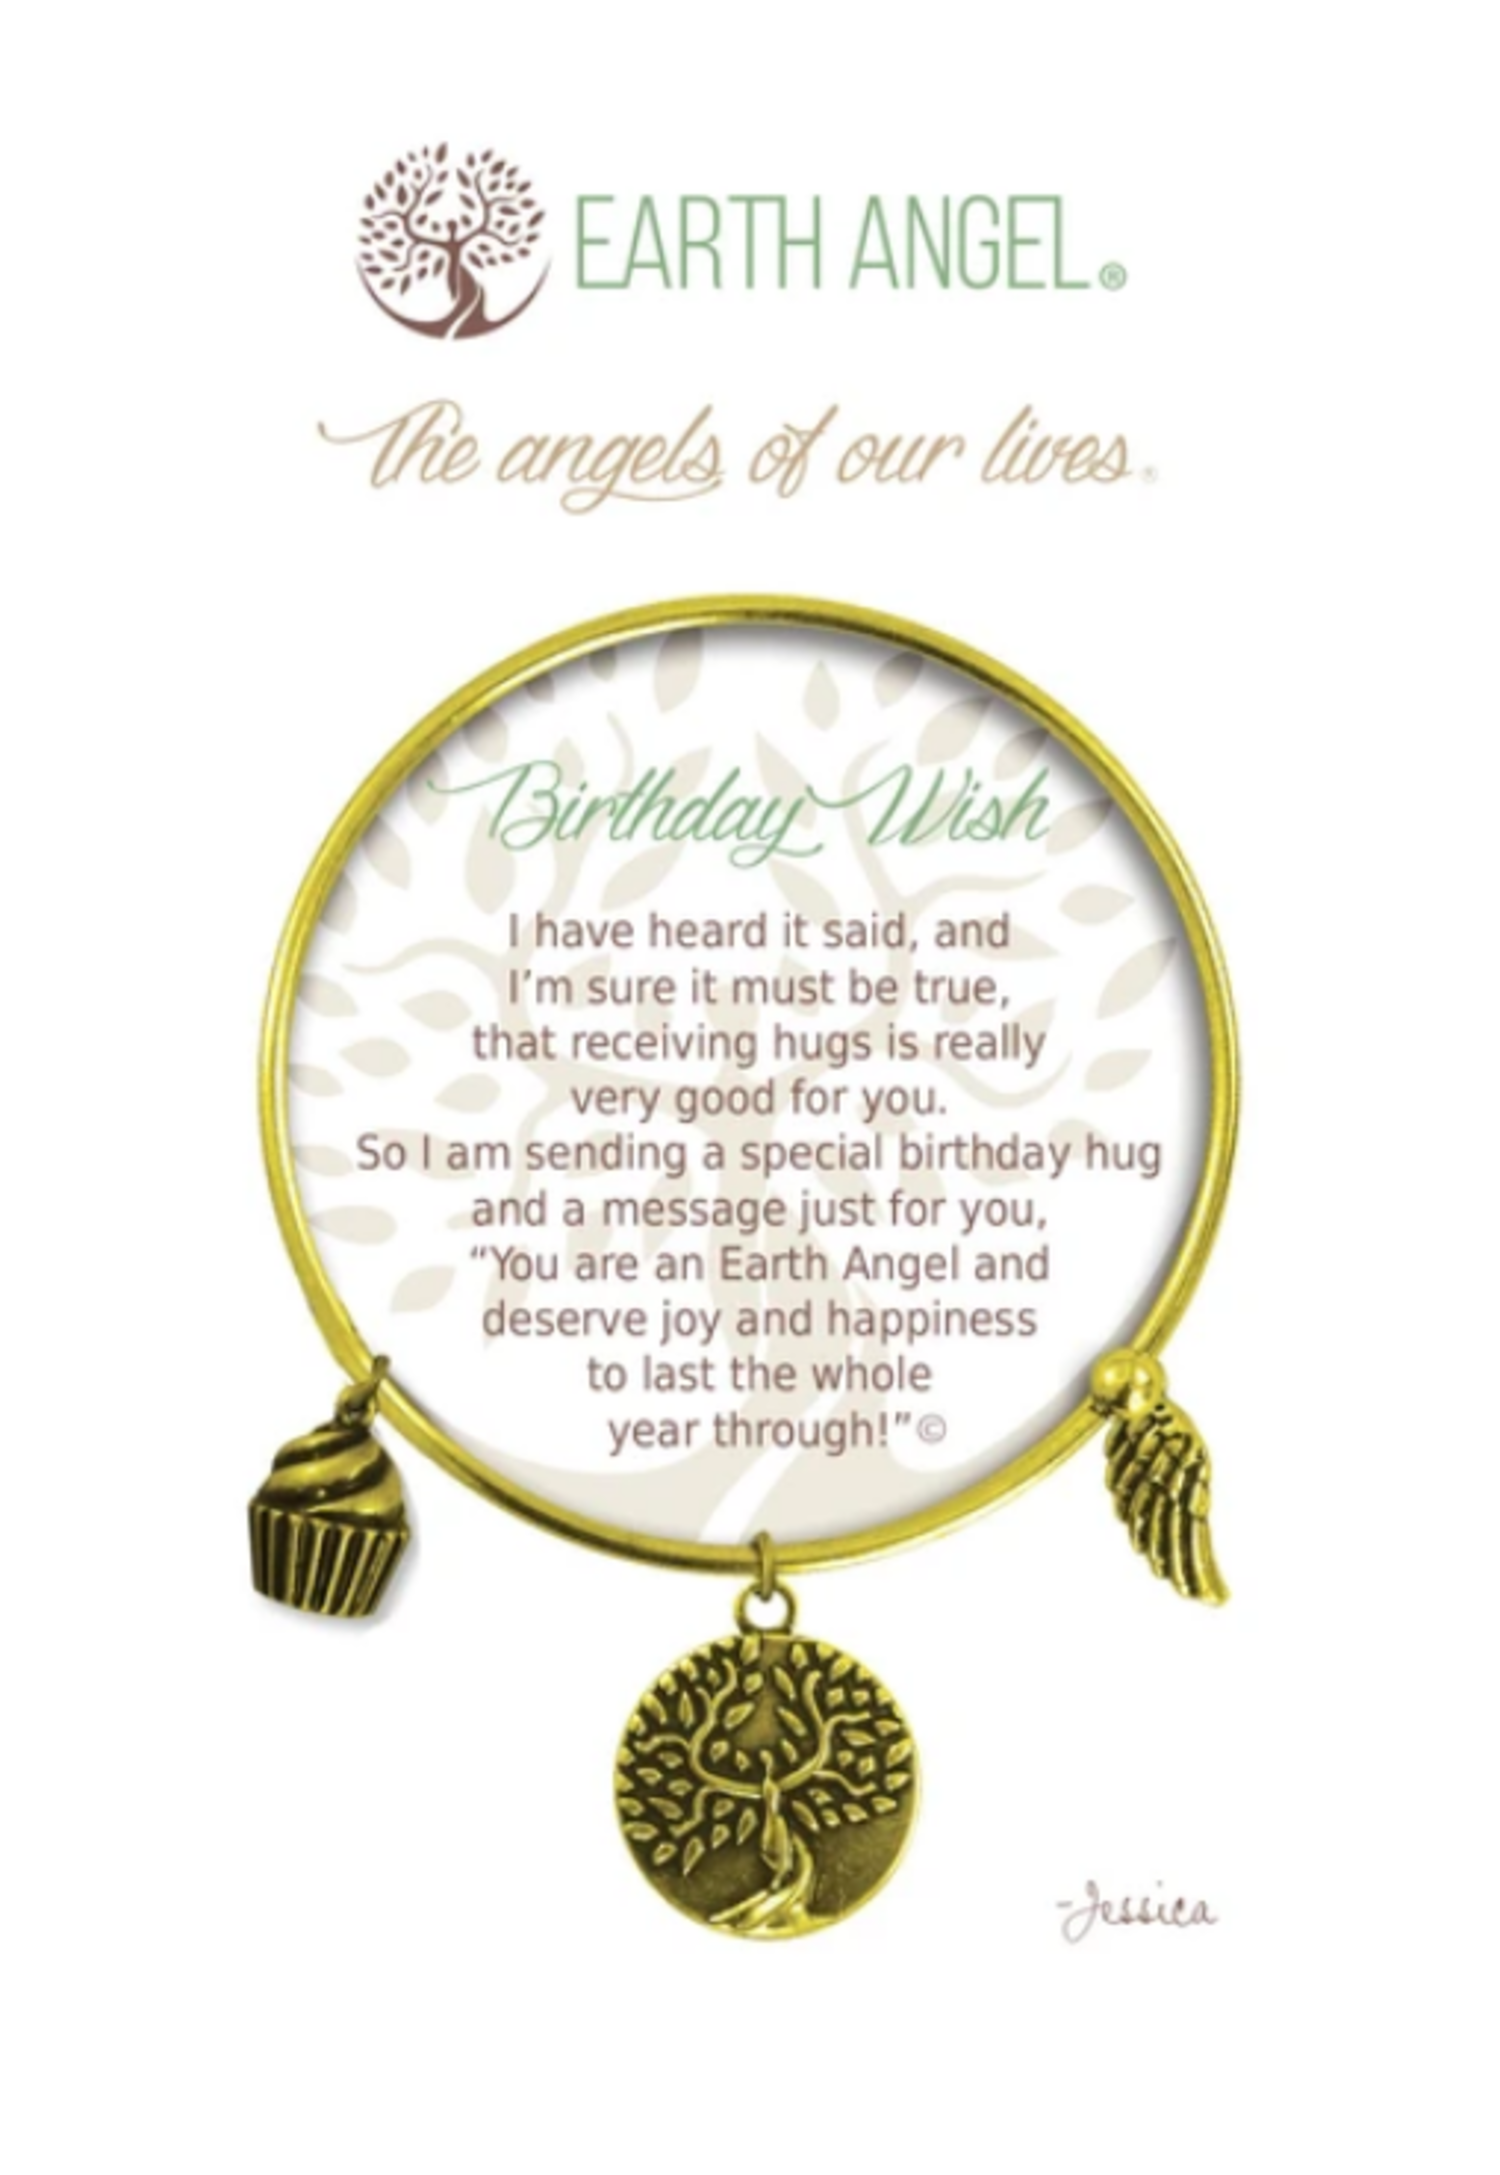 21st Birthday Wishes Gift Idea Sterling Dandelion Necklace | 21st birthday  wishes, 21st birthday, 21st birthday quotes